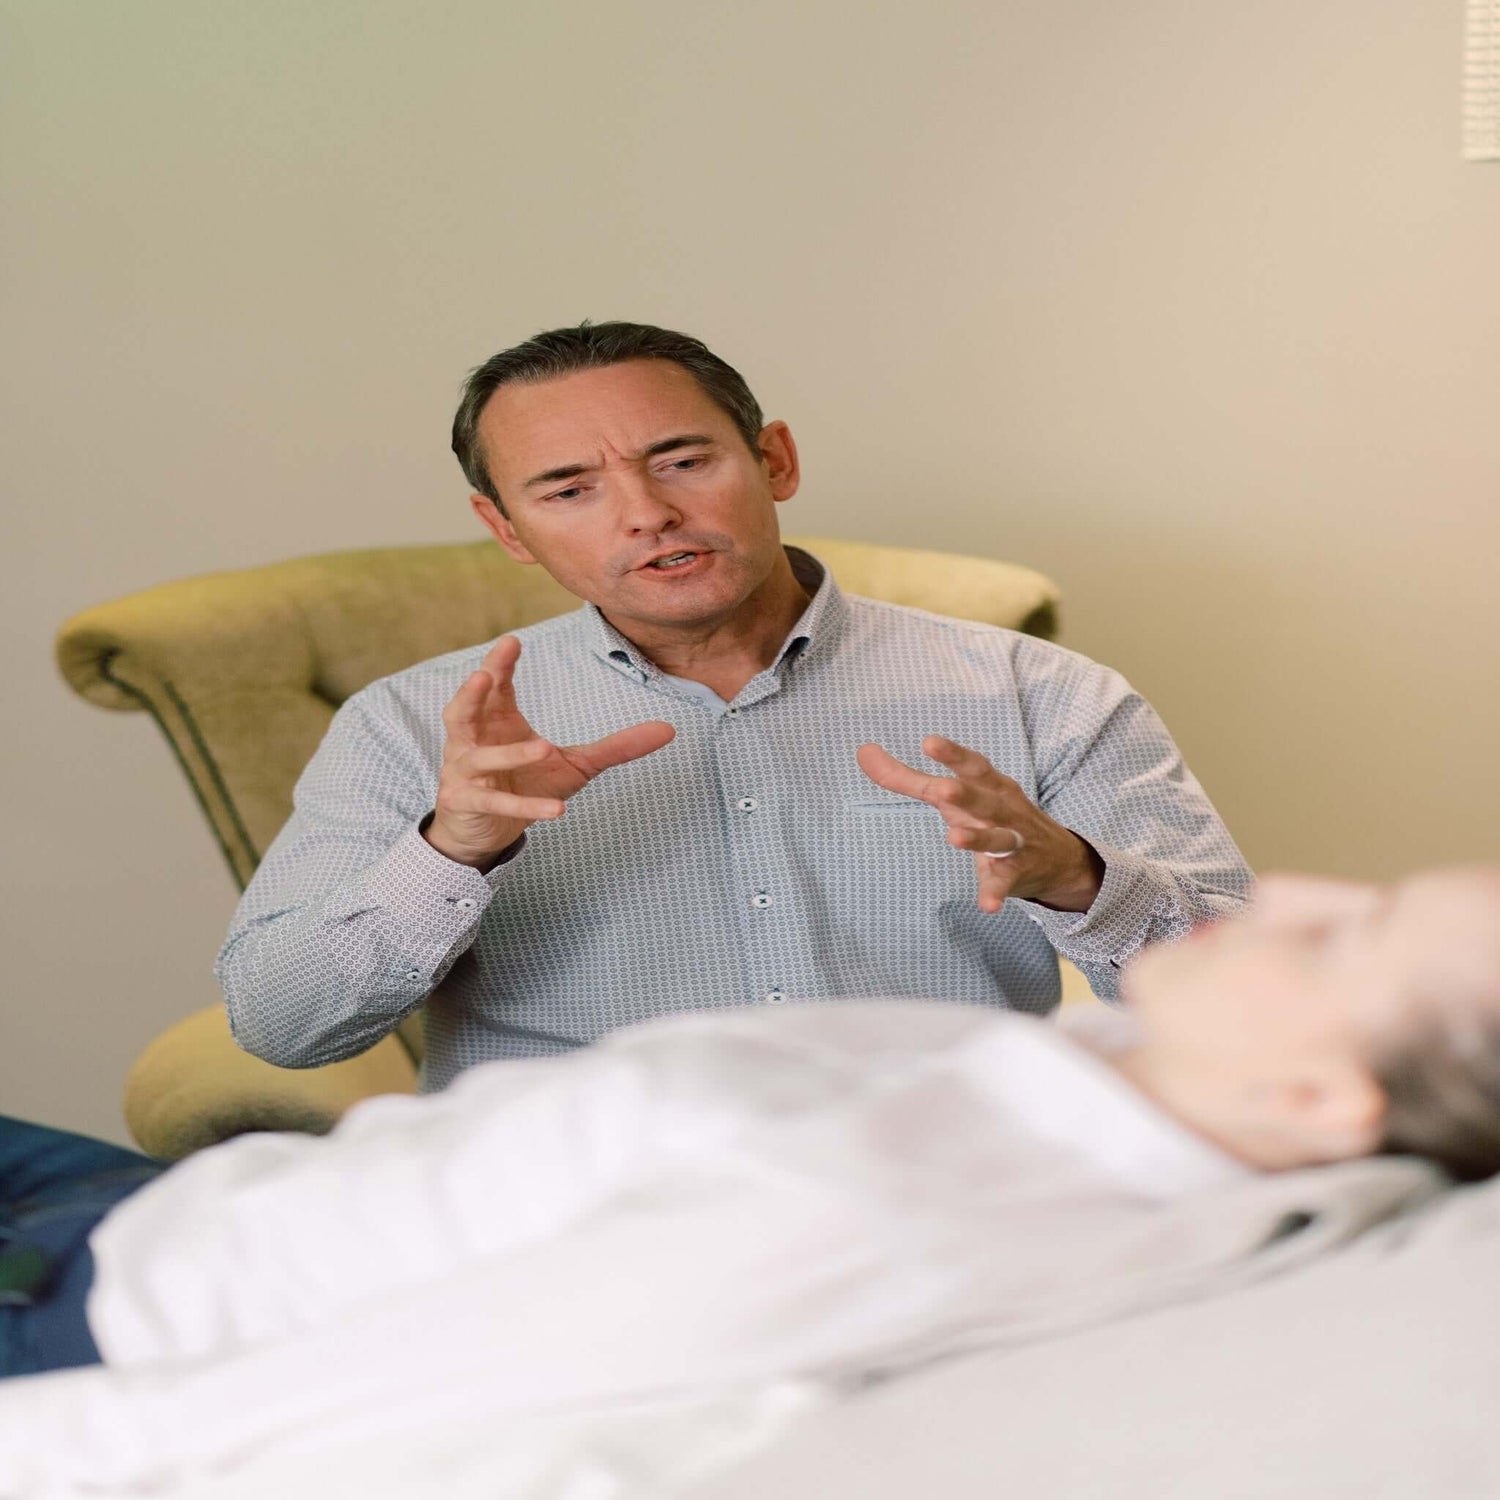 Hypnotherapist working with a client who is laid on the couch in front of him.